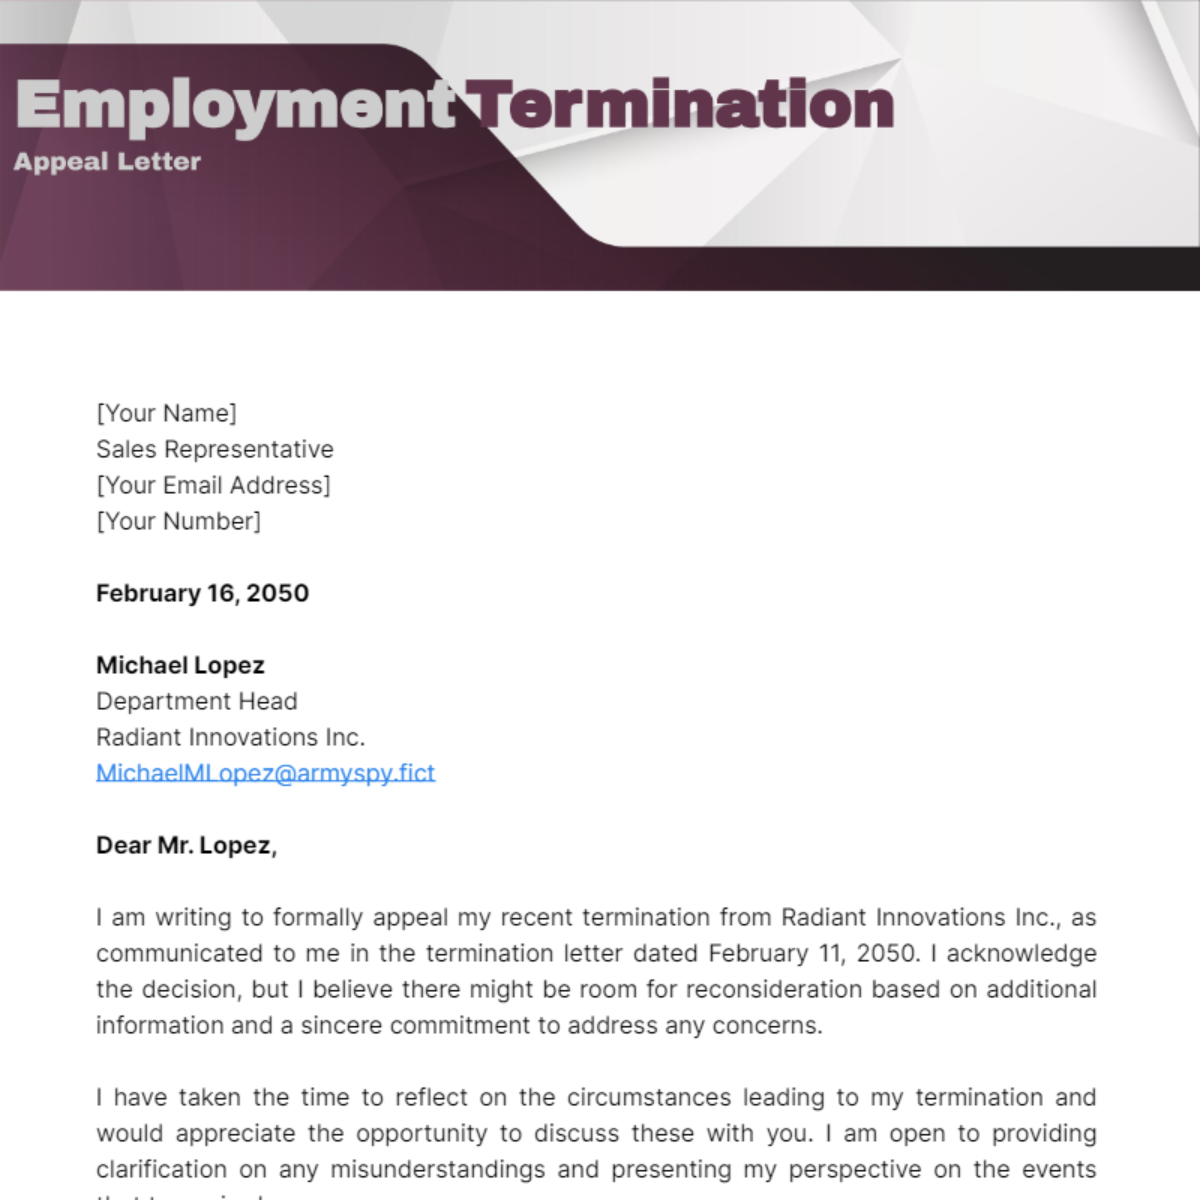 Employment Termination Appeal Letter Template